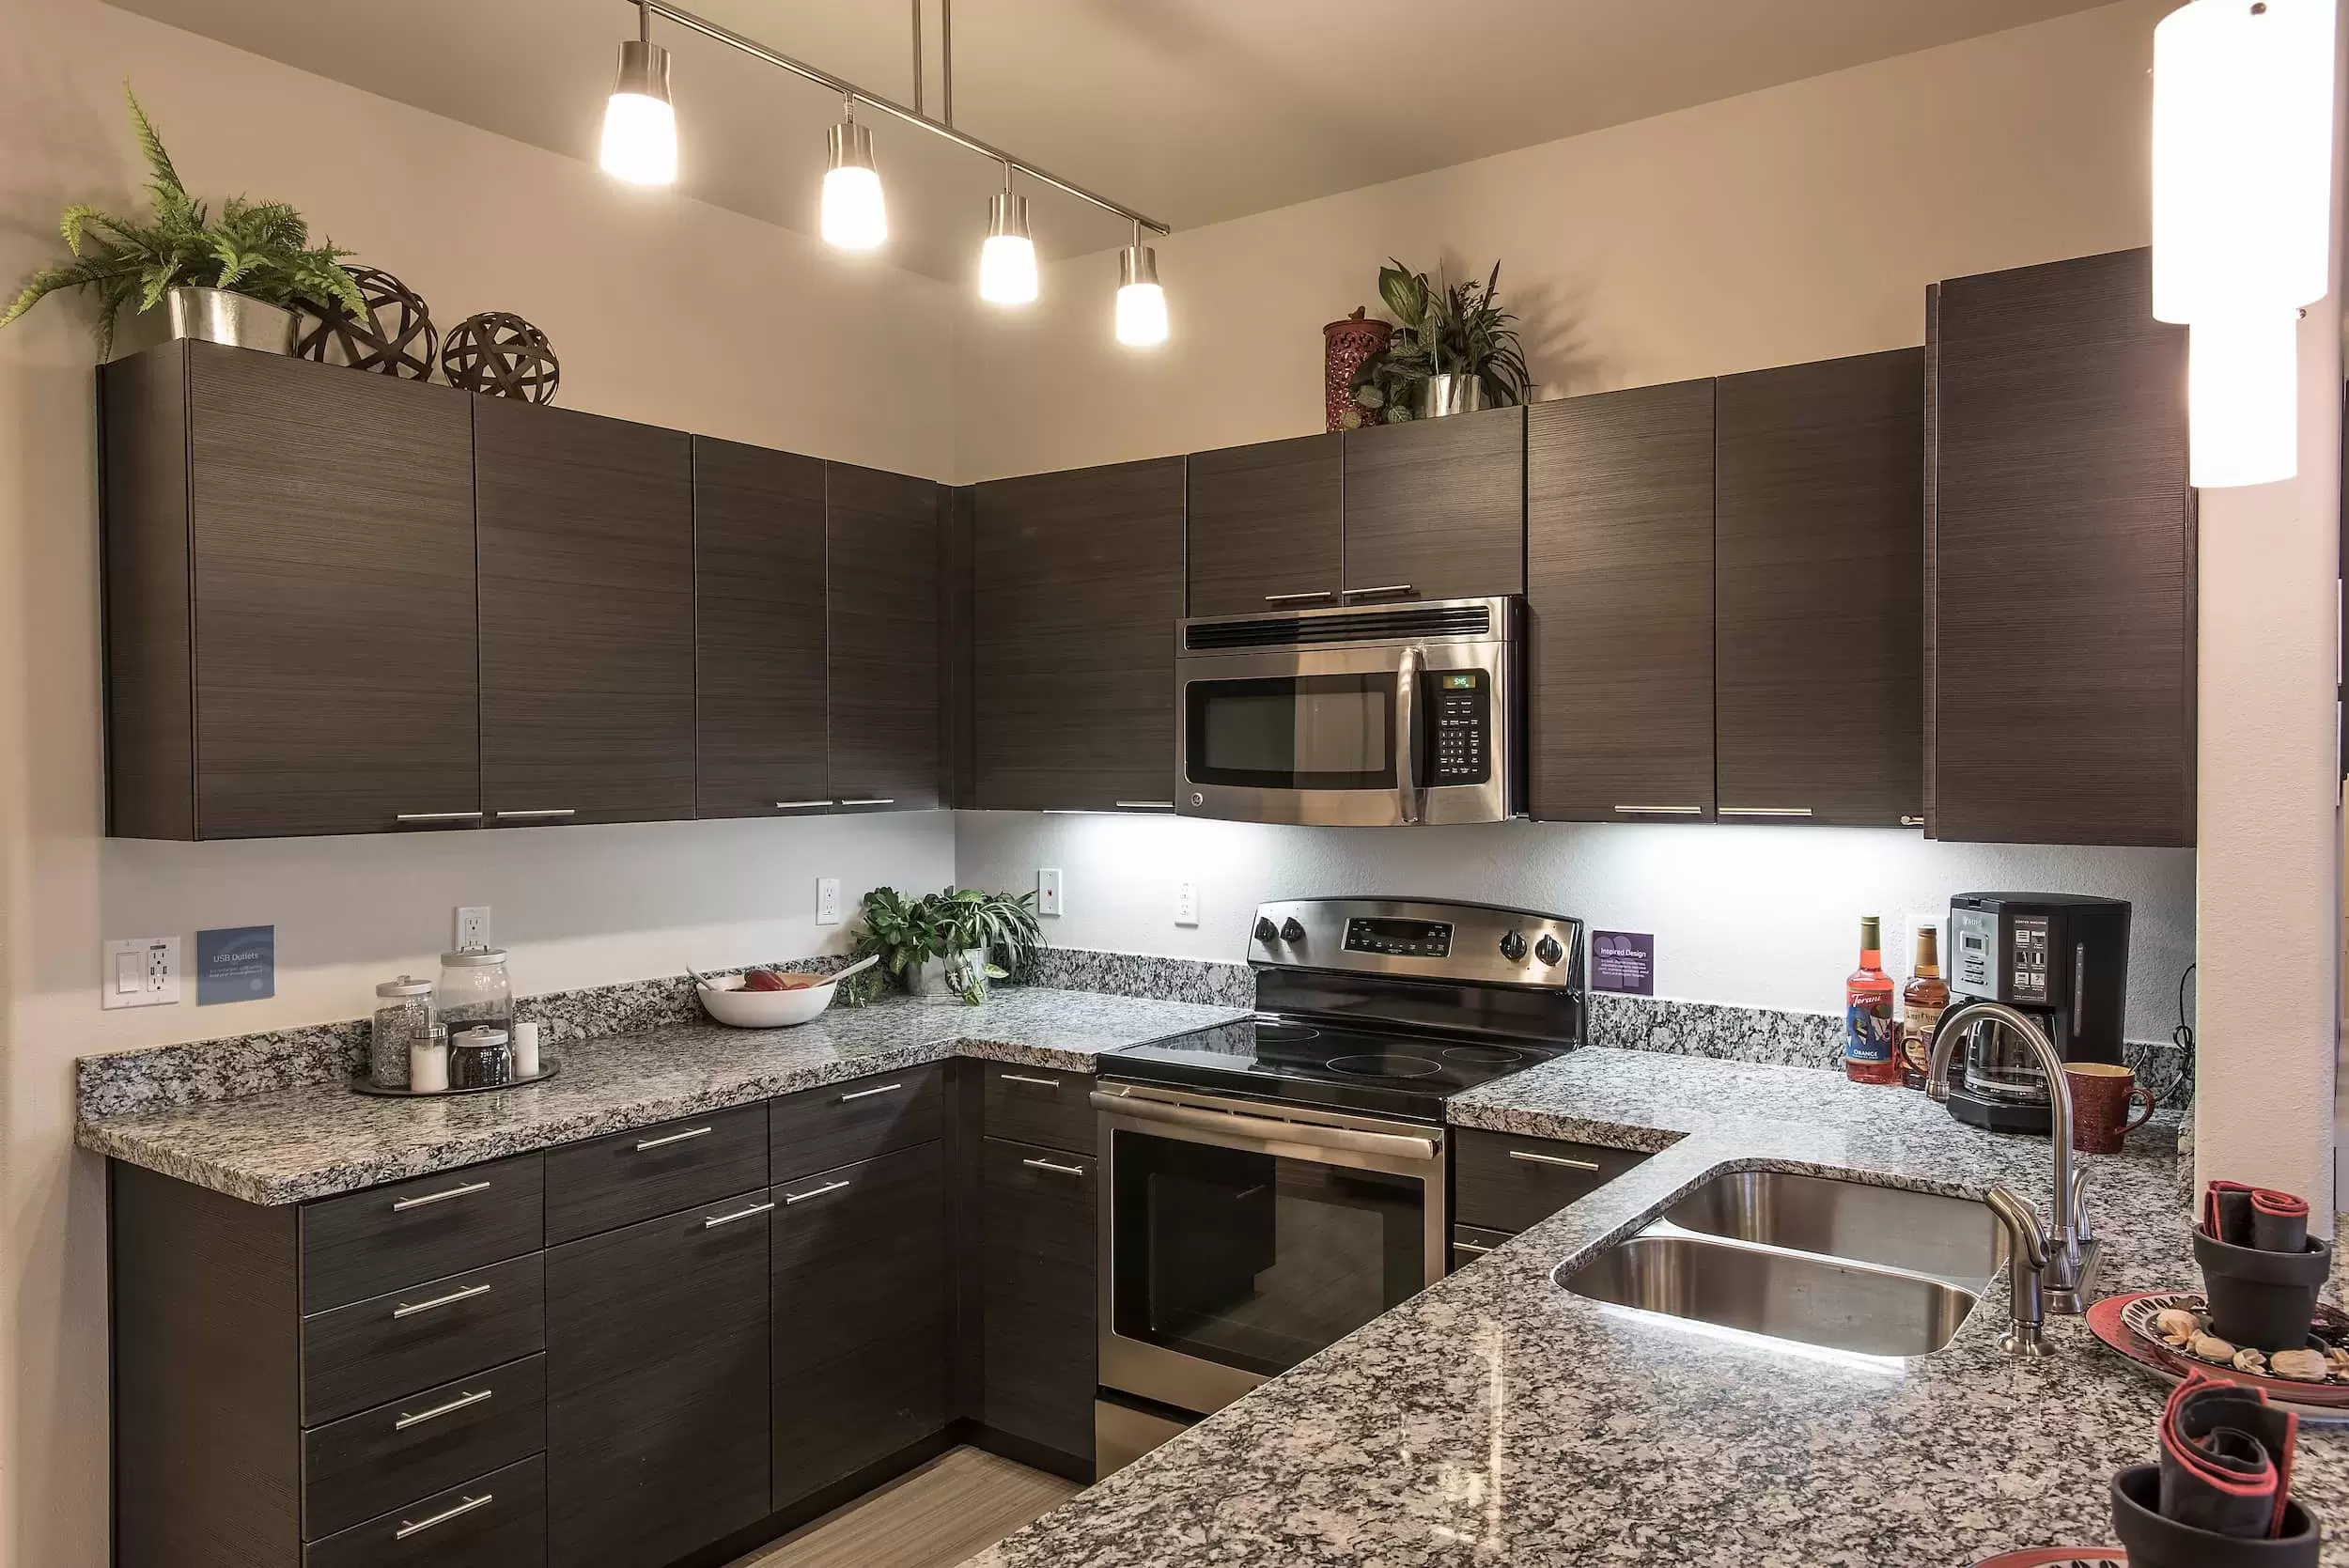 A modern apartment kitchen with stainless appliances and granite countertops.